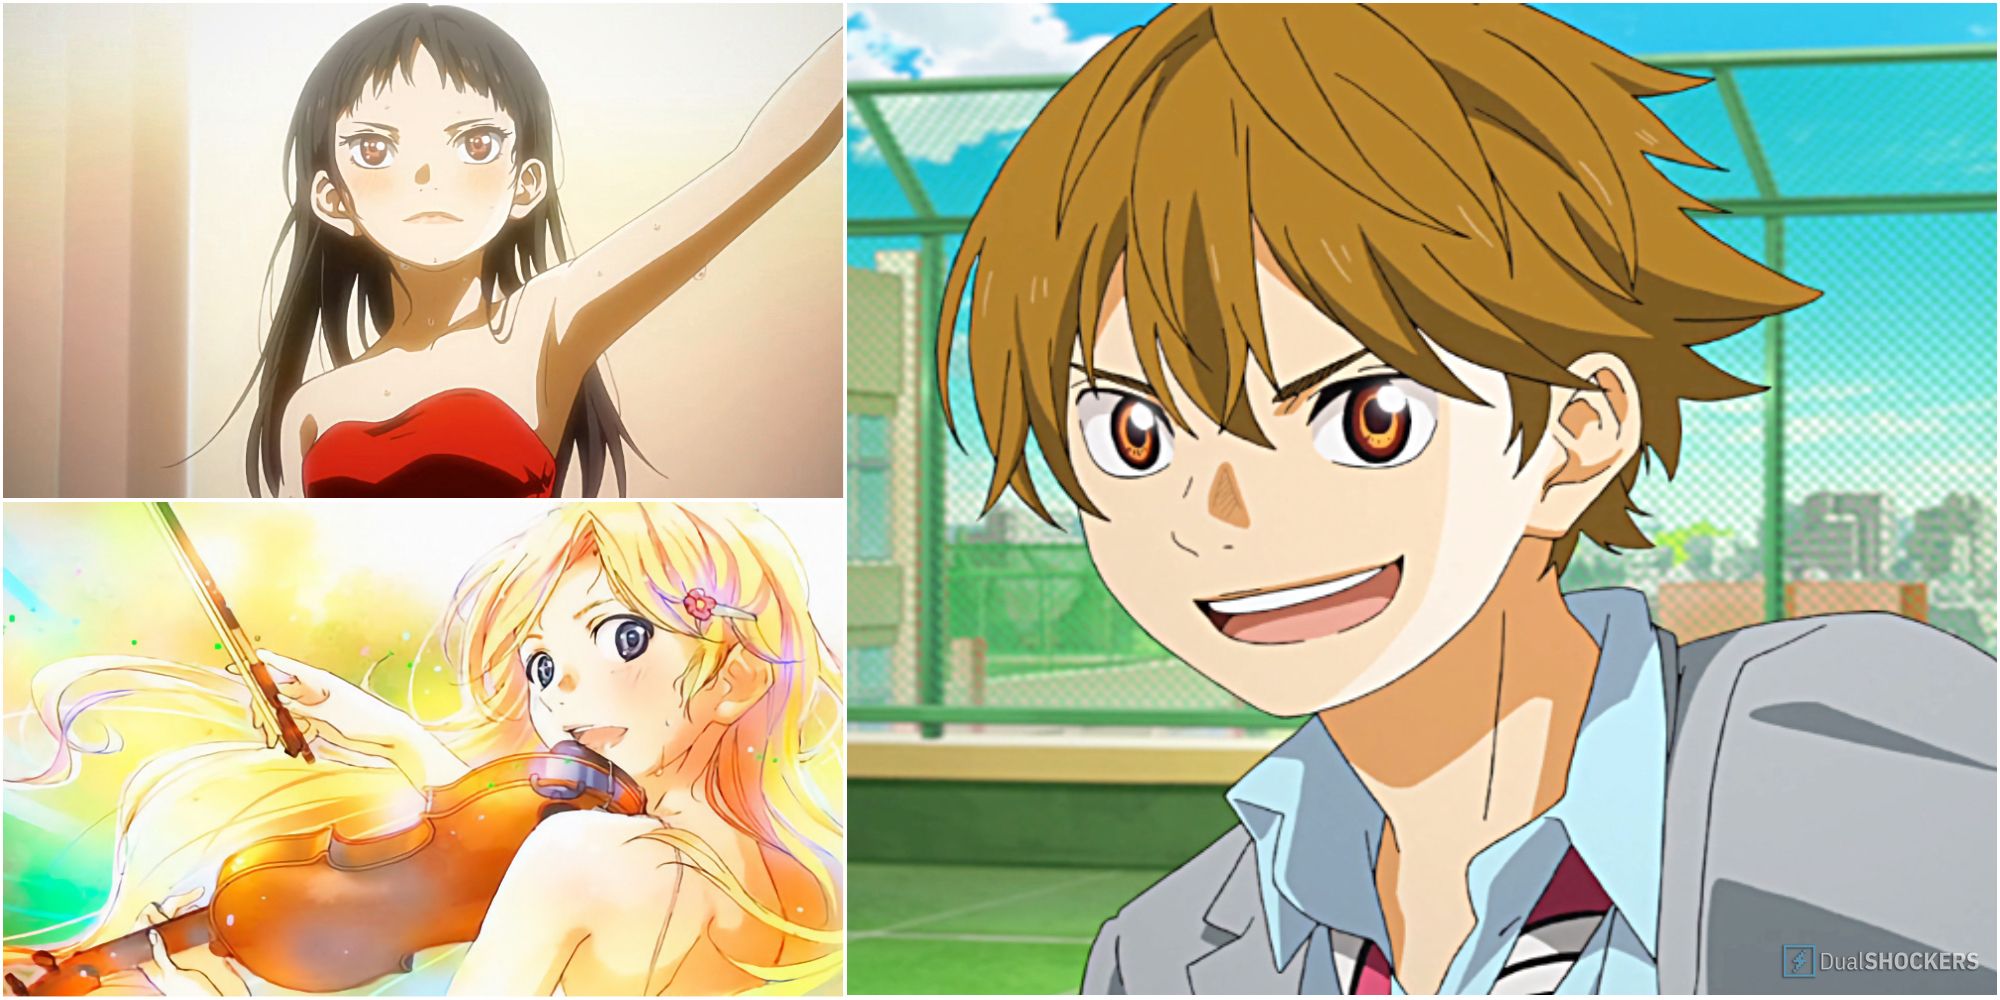 Your lie in April anime moments - Anime cute couple images | Facebook